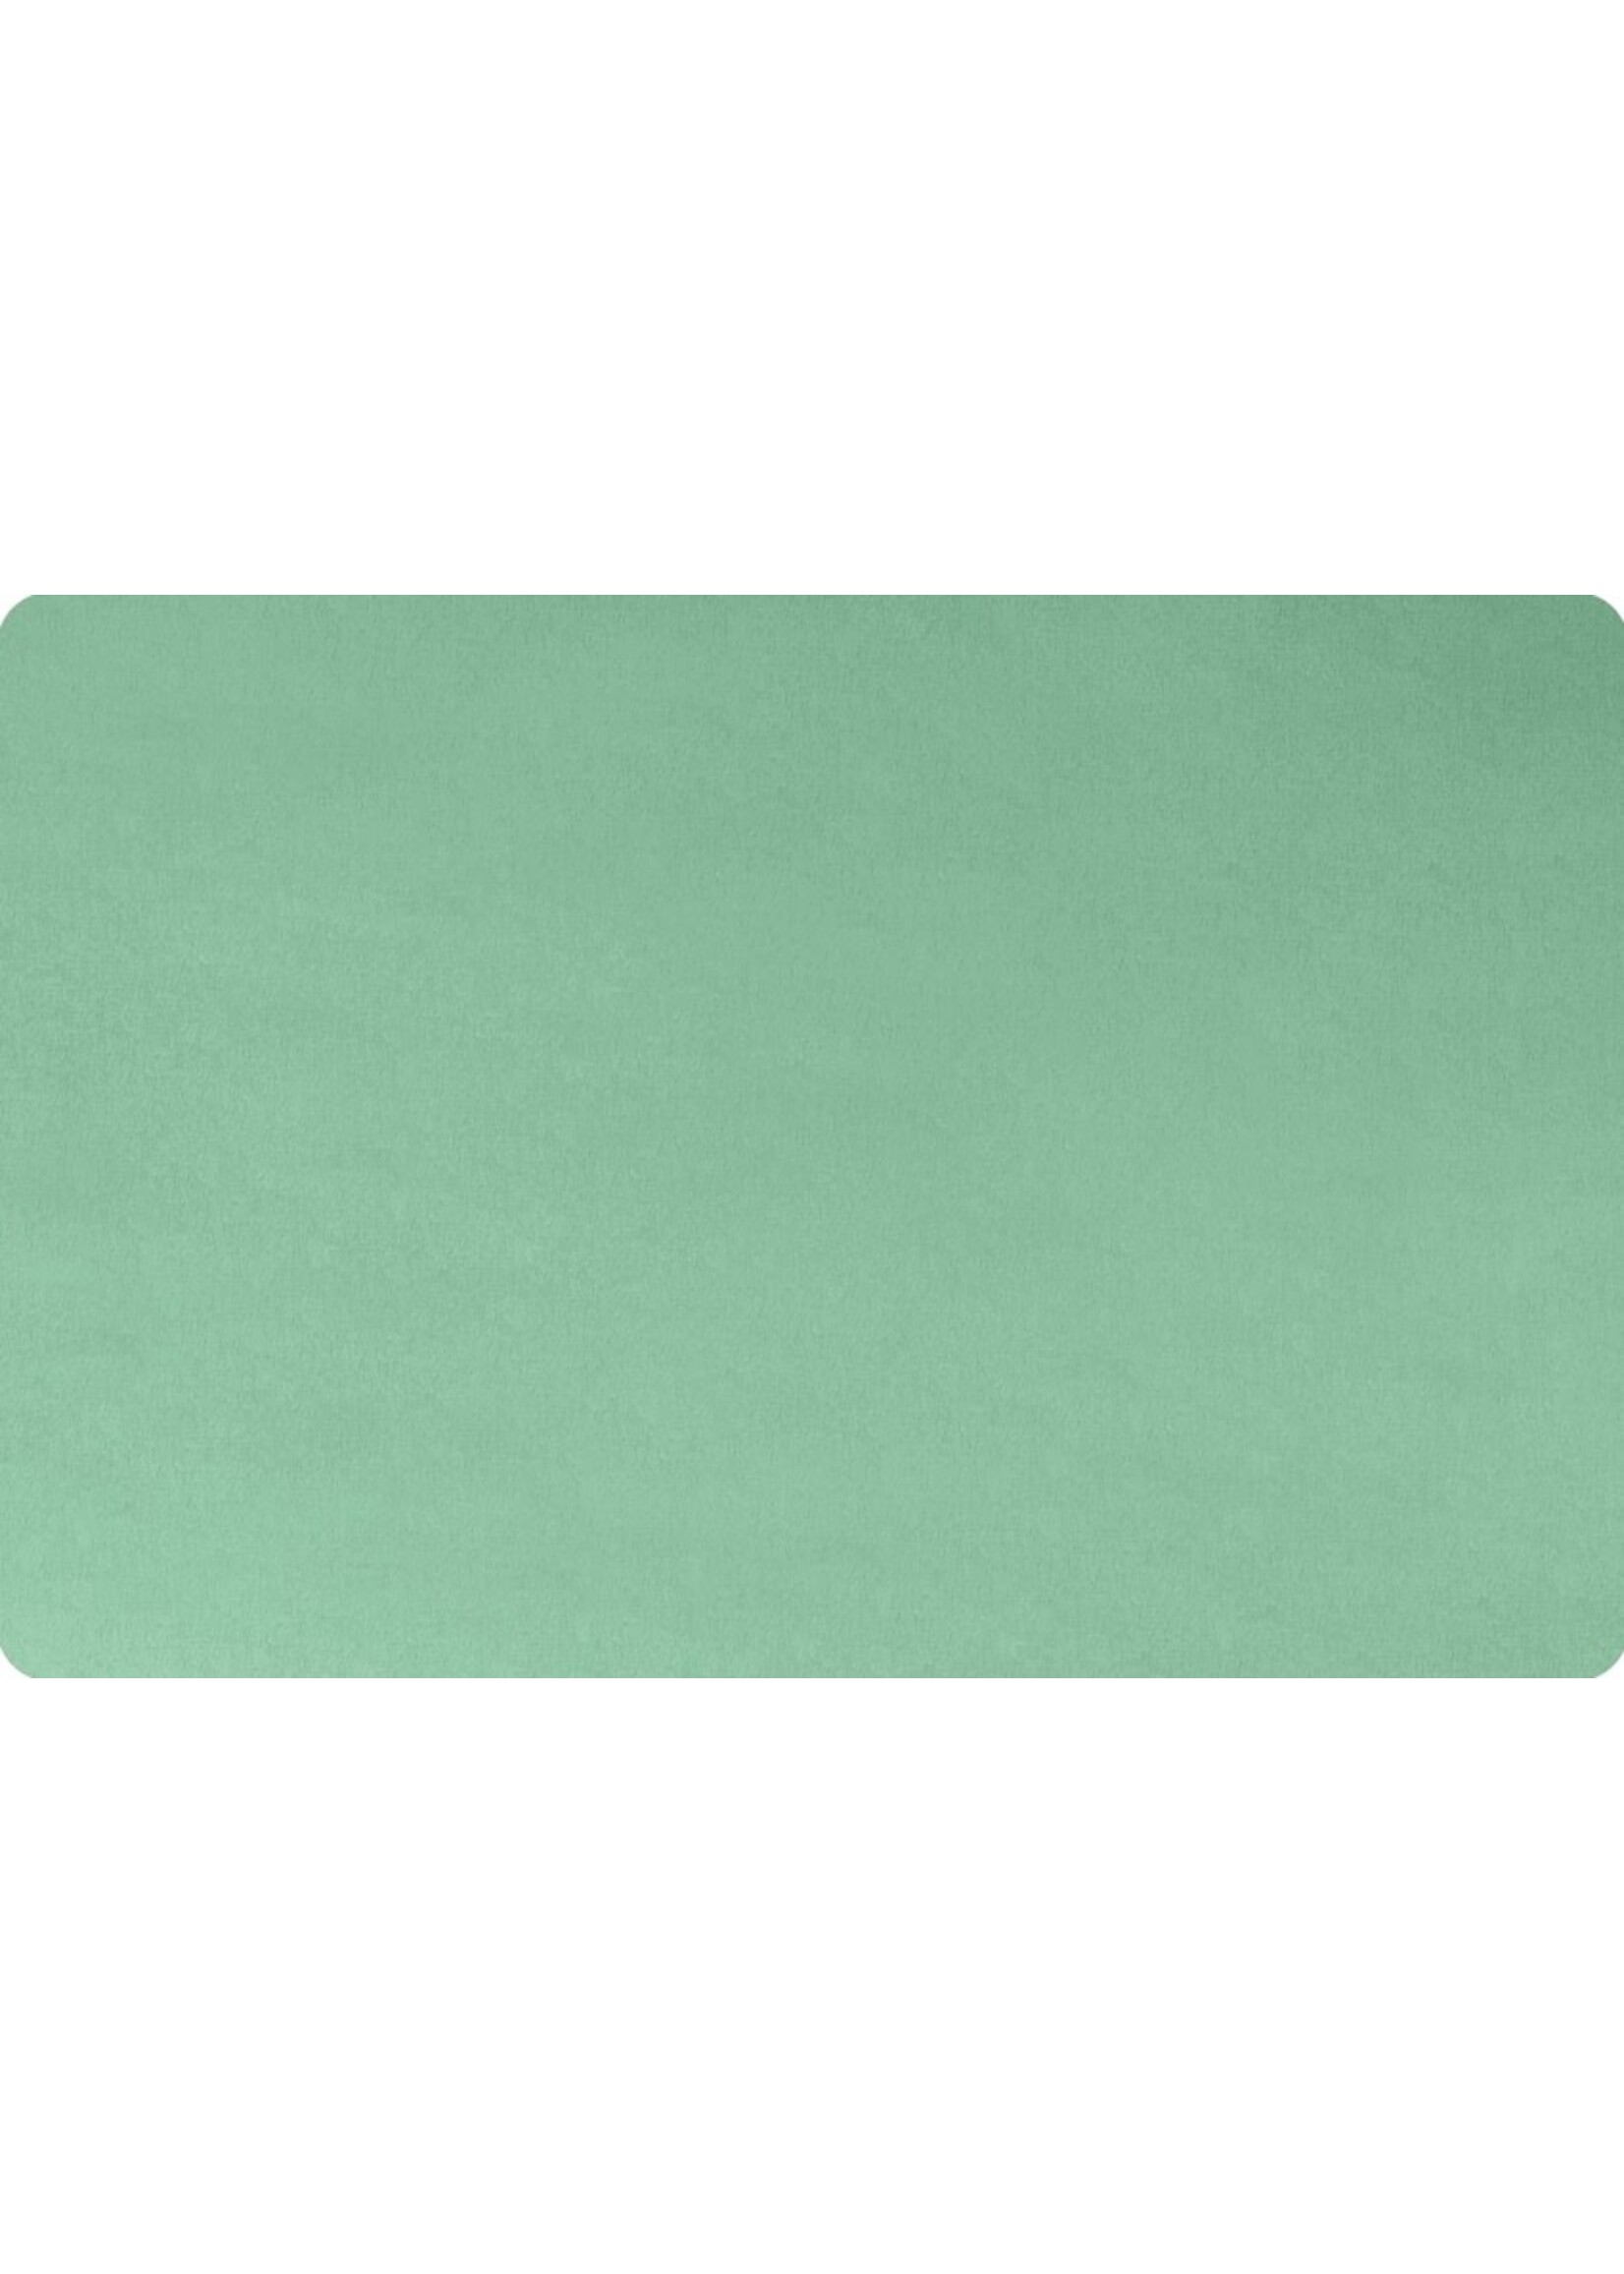 Shannon Fabrics Minky, Spearmint Extra Wide Solid Cuddle3, 90", (by the inch)